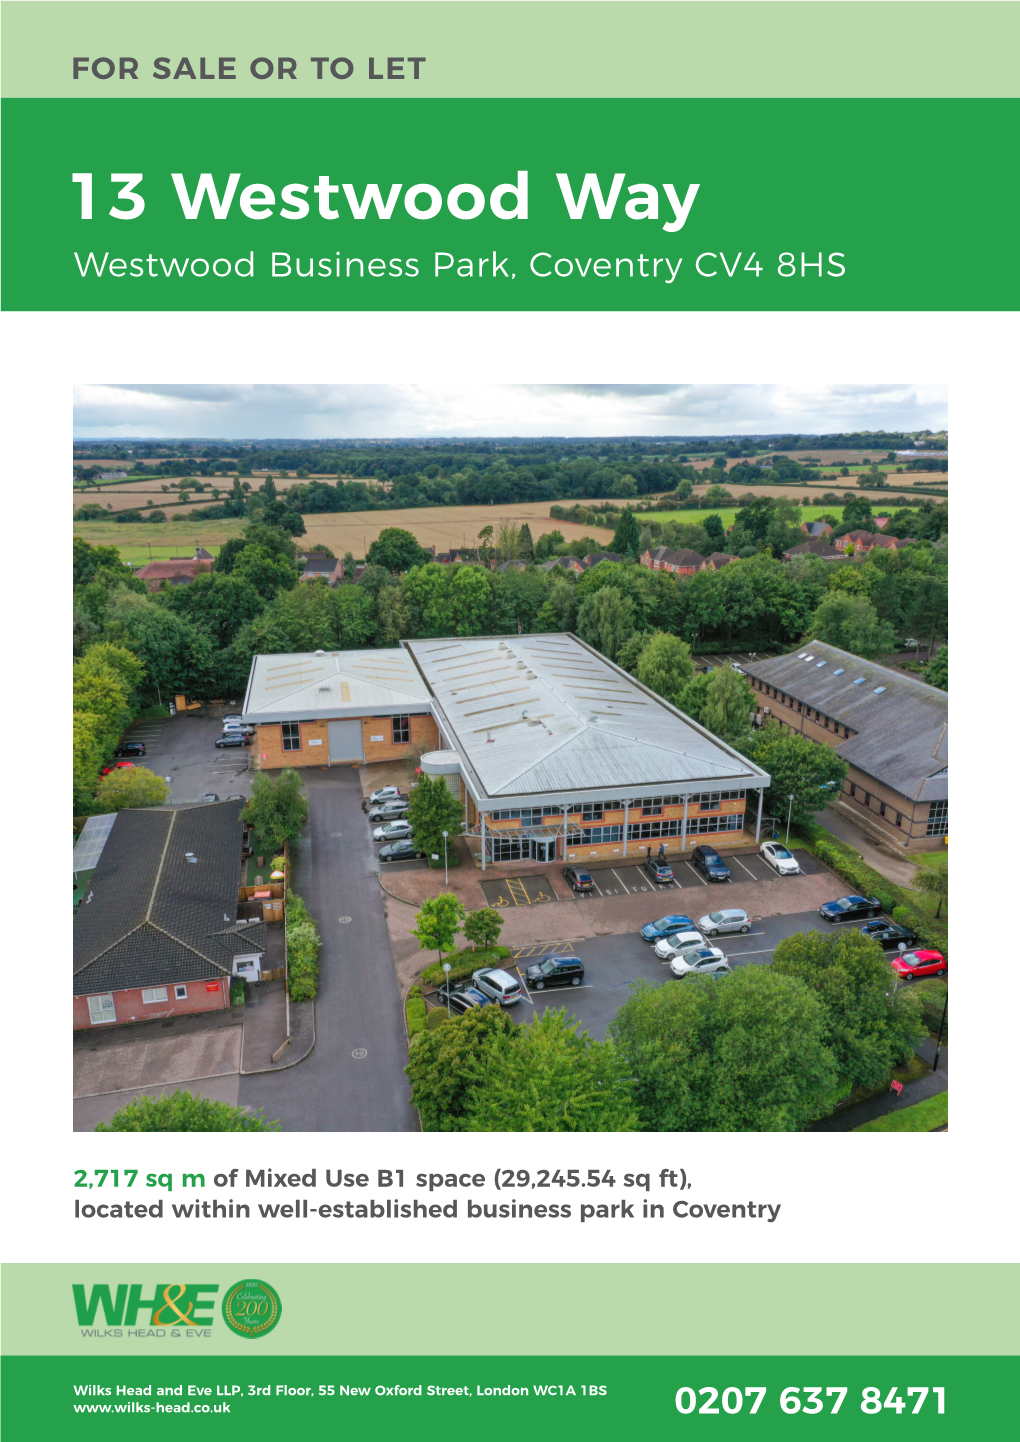 13 Westwood Way Westwood Business Park, Coventry CV4 8HS